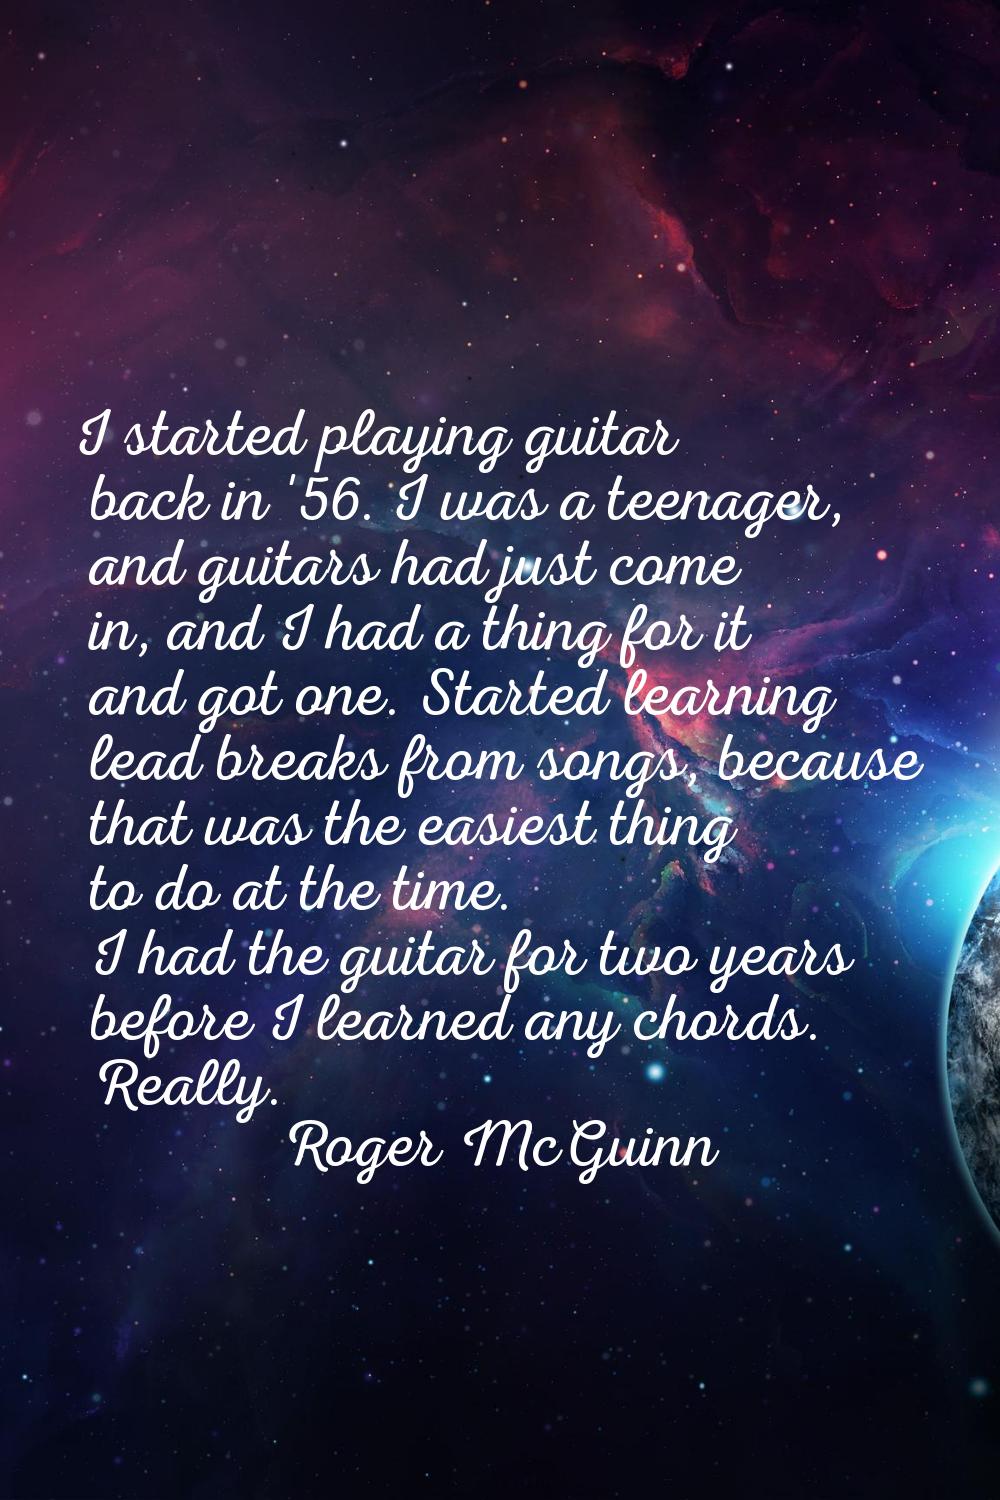 I started playing guitar back in '56. I was a teenager, and guitars had just come in, and I had a t